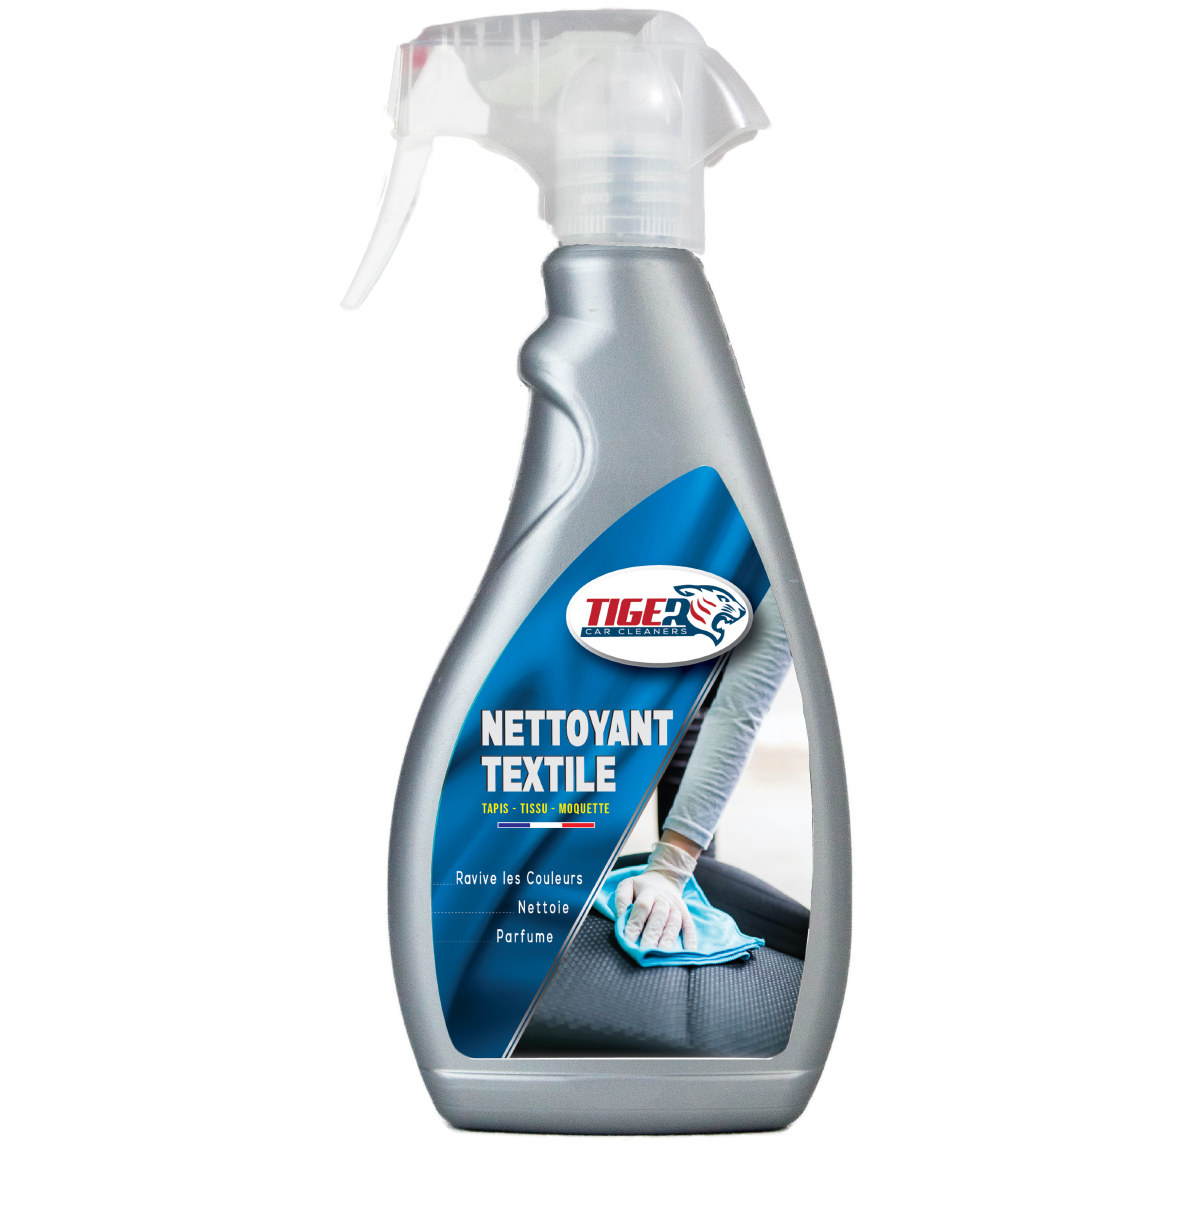 Nettoyant textile – Tiger Car Cleaners